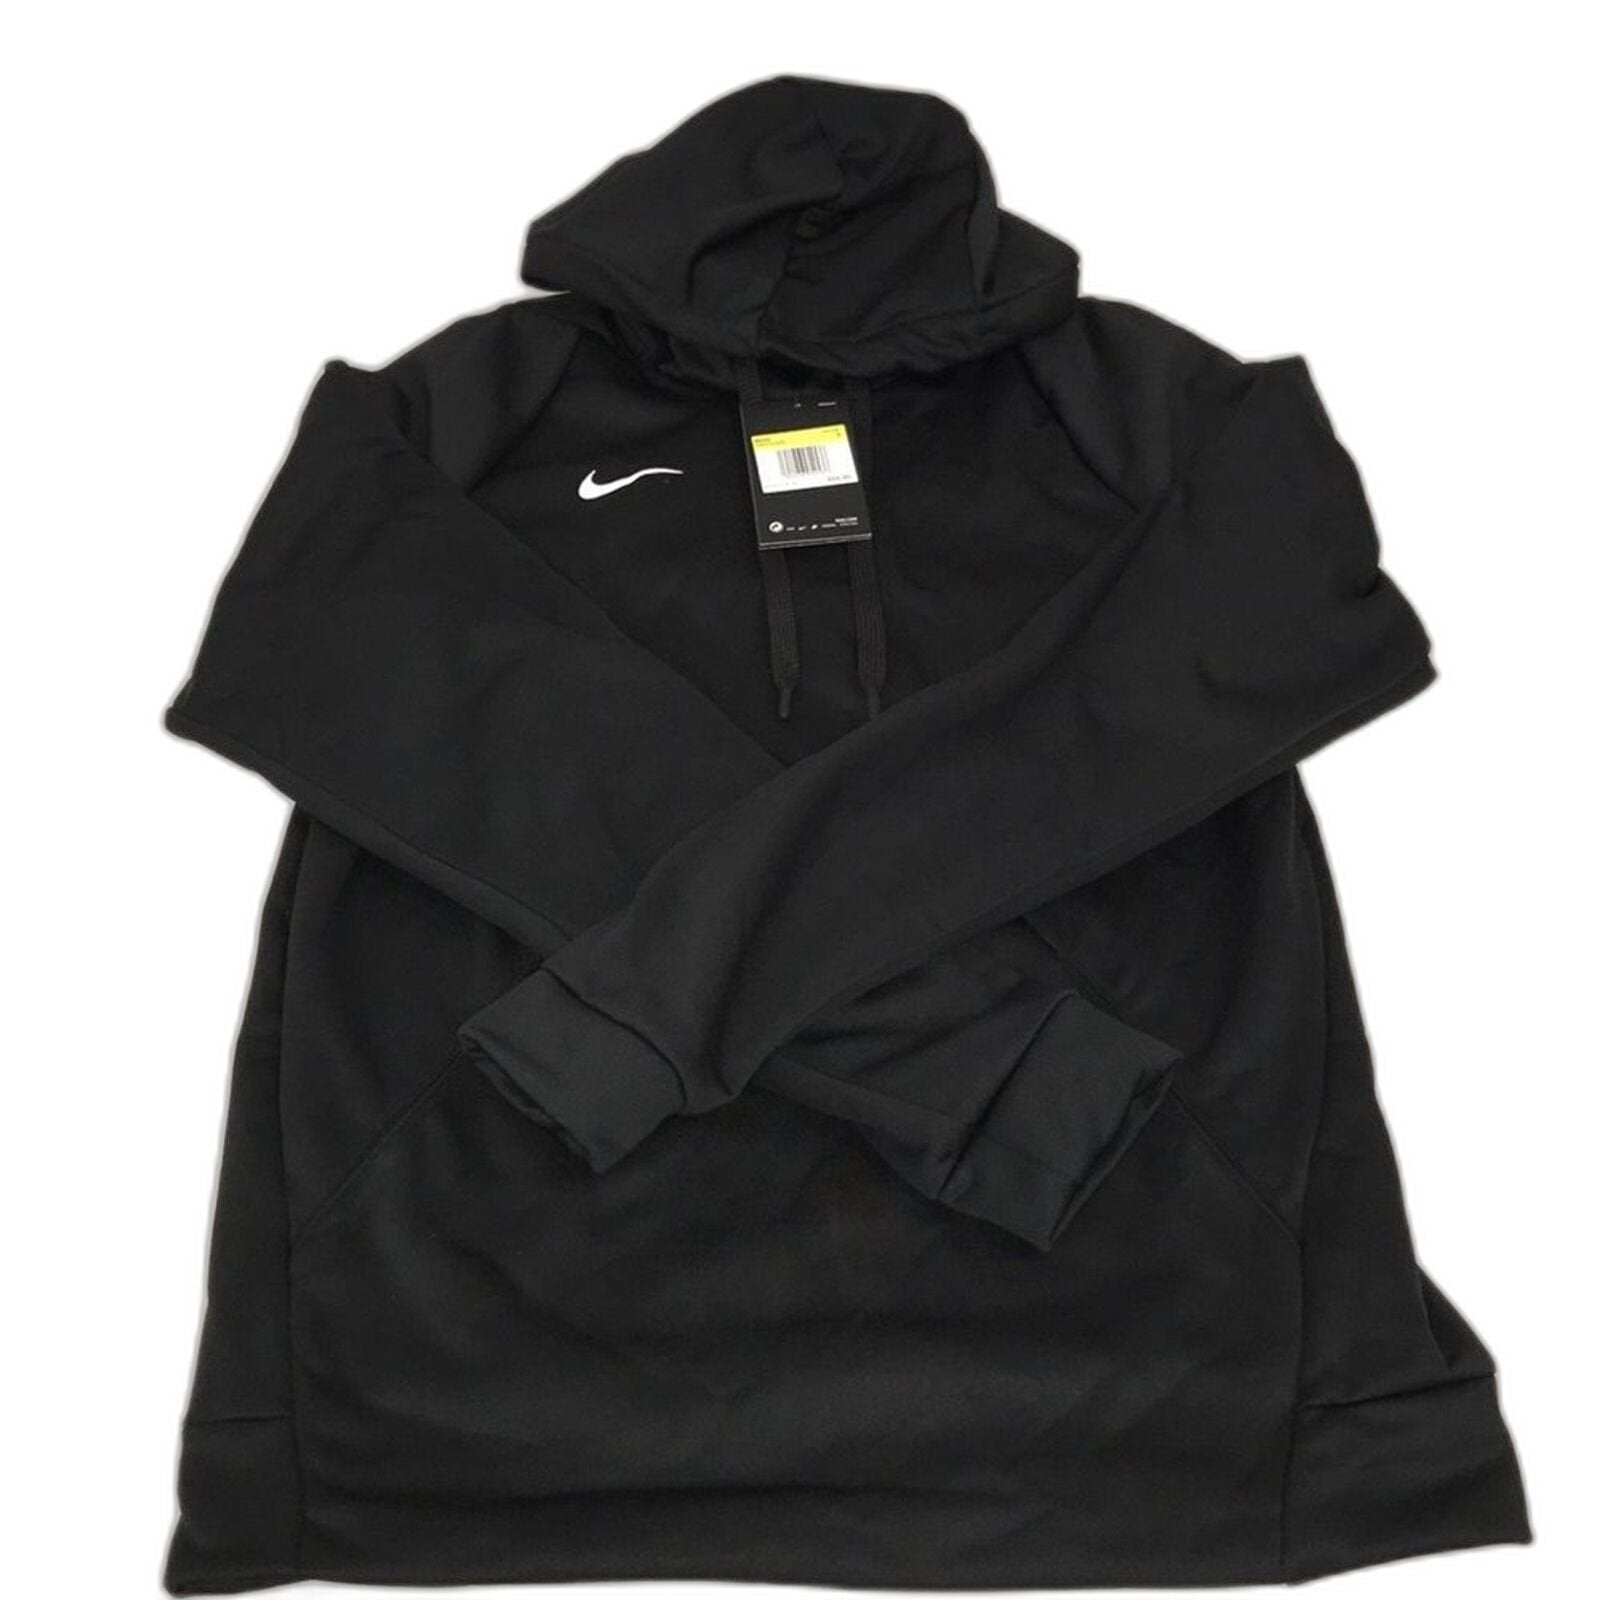 Nike Therma Pullover Hoodie Black Mens Size Small S